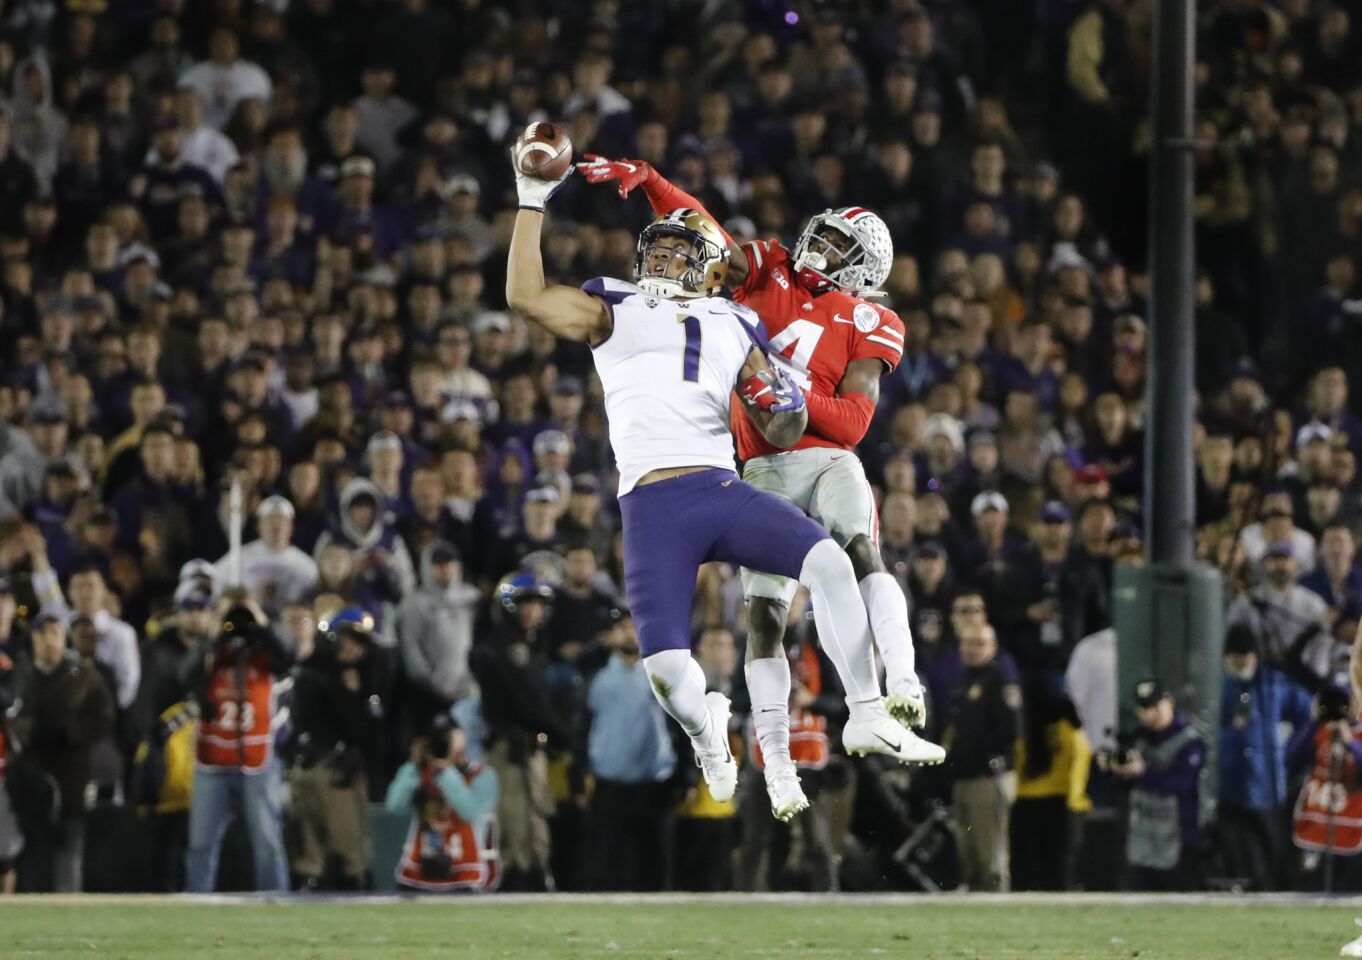 Washington tight end Hunter Bryant (1) leaps up to make a one-handed catch against Ohio State safety Jordan Fuller (4) as the Huskies try to make a comeback in the fourth quarter.